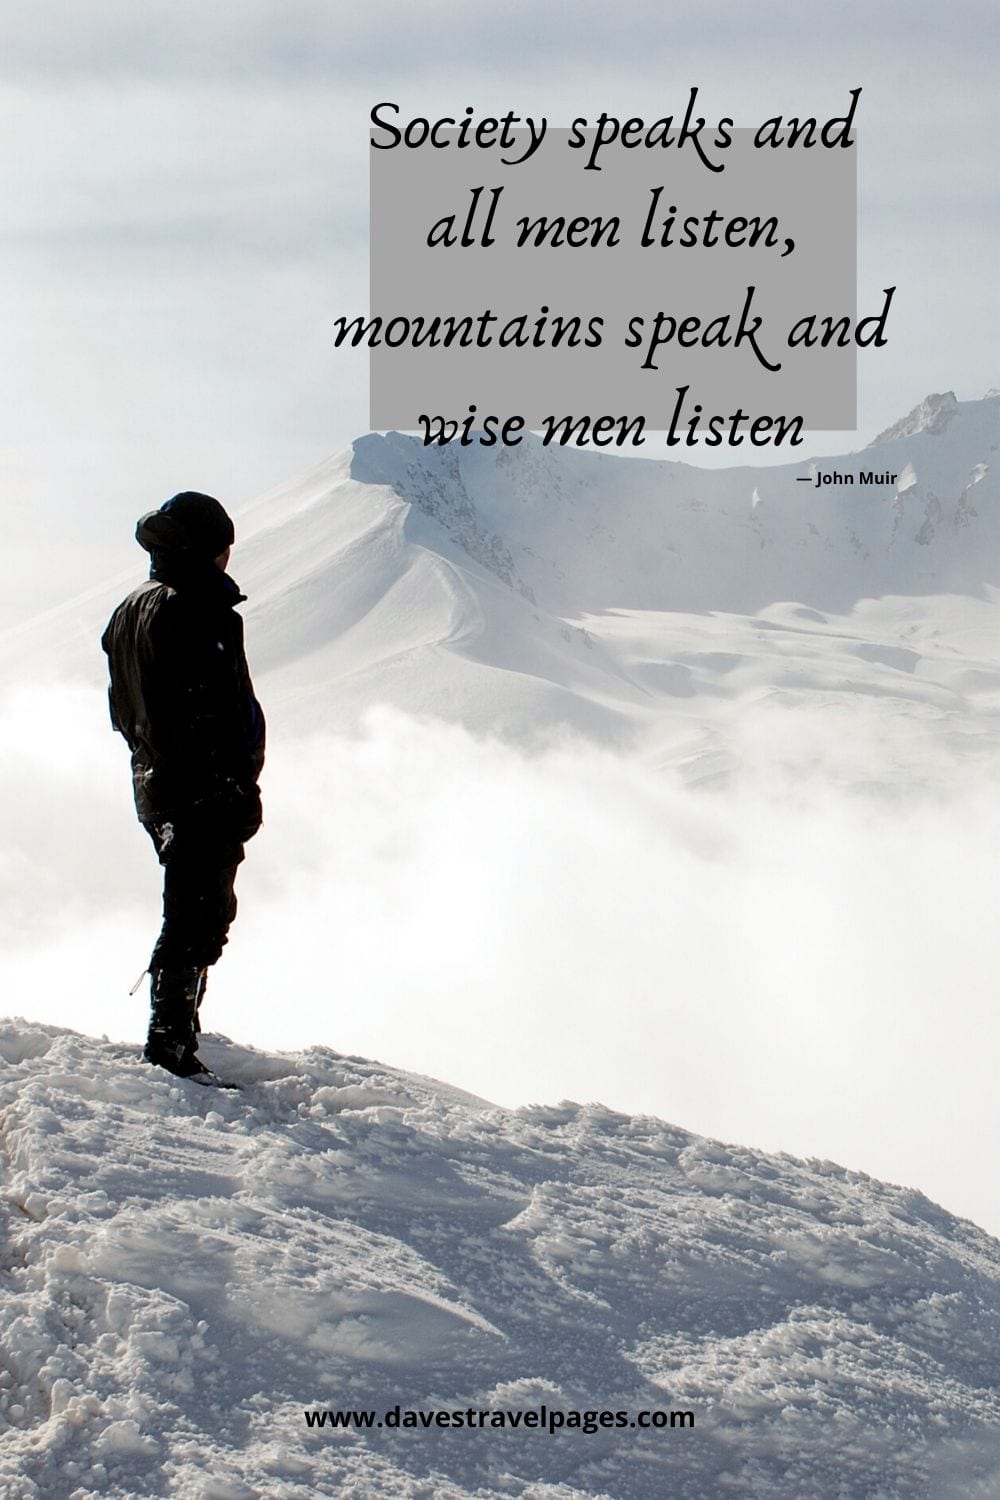 Mountain Quotes: “Society speaks and all men listen, mountains speak and wise men listen.”― John Muir